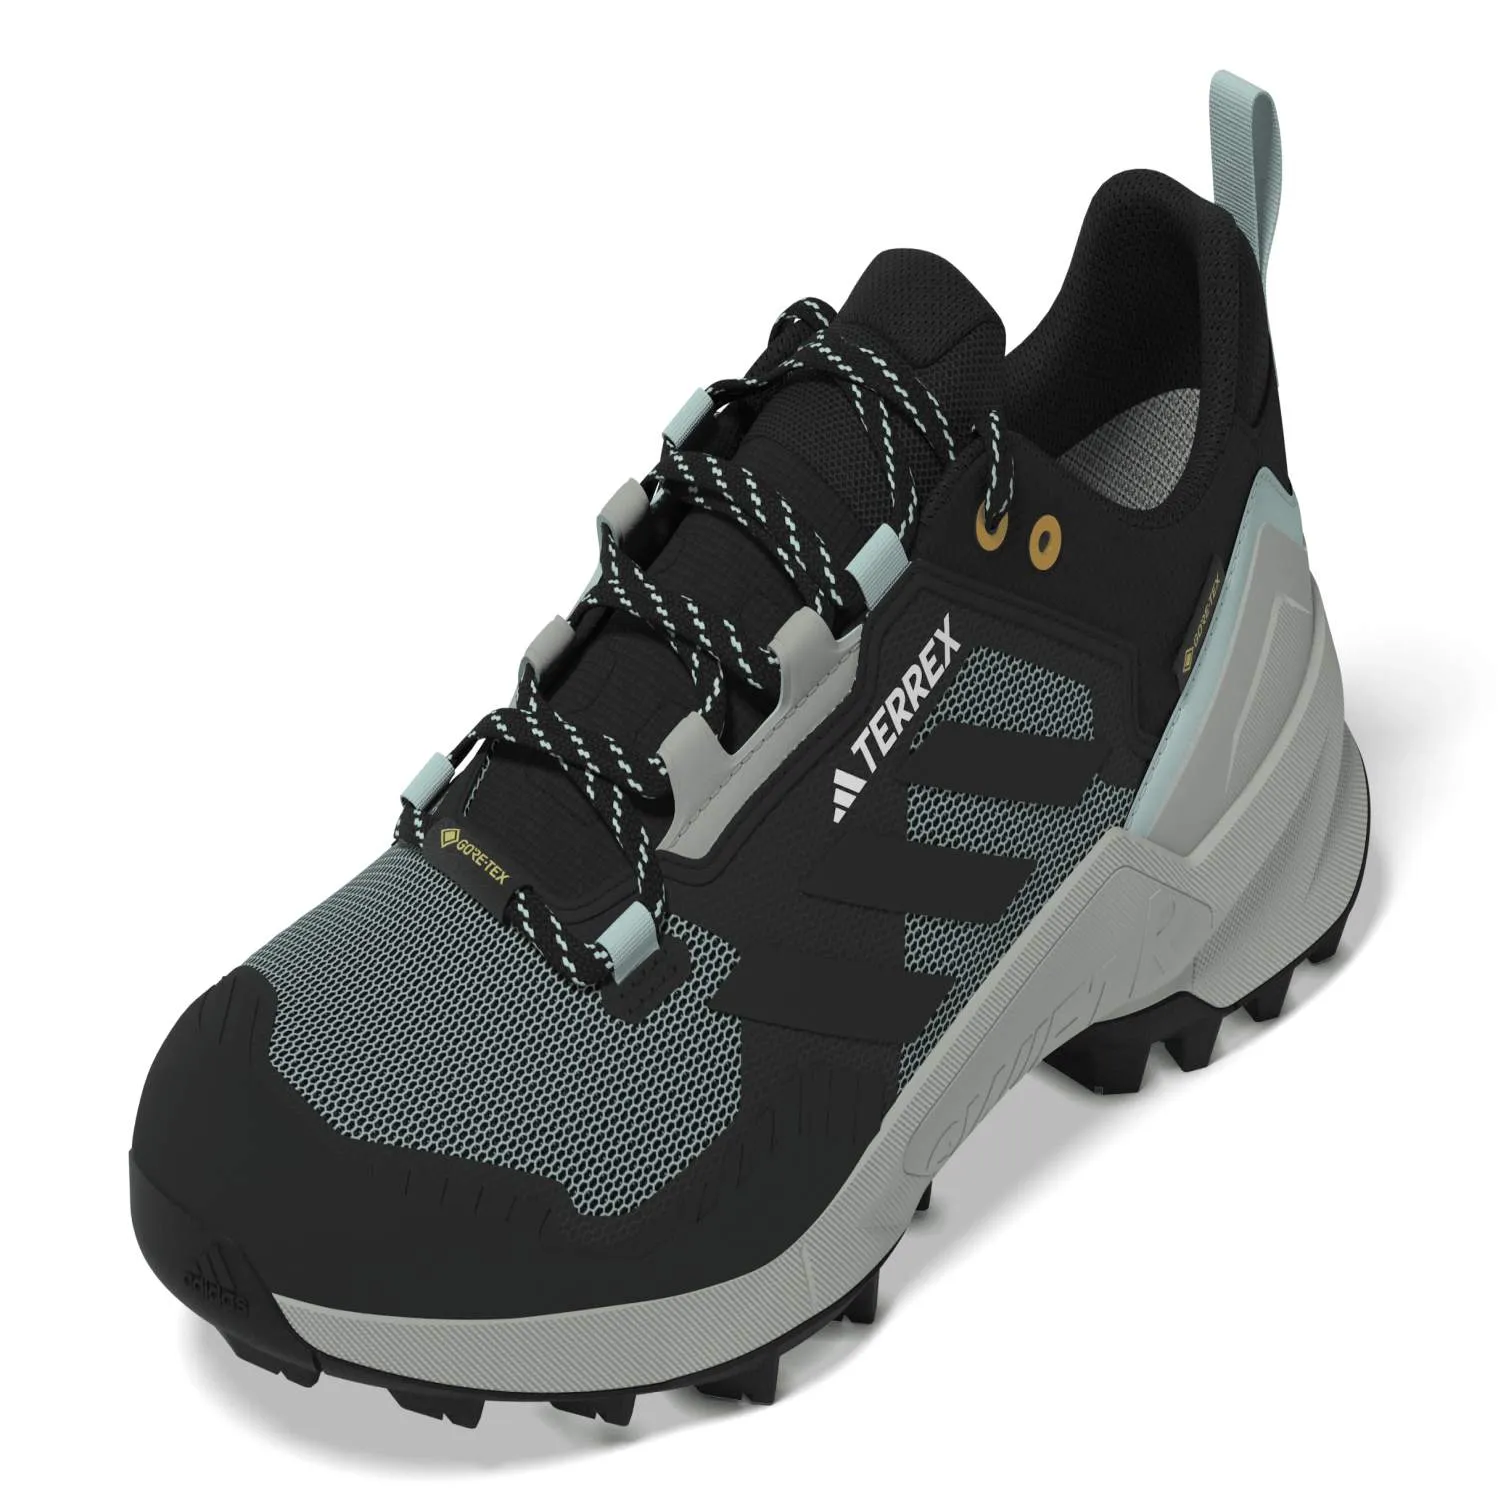 IF2403_11_FOOTWEAR_3D - Rendering_Side Lateral Left View_white.jpg